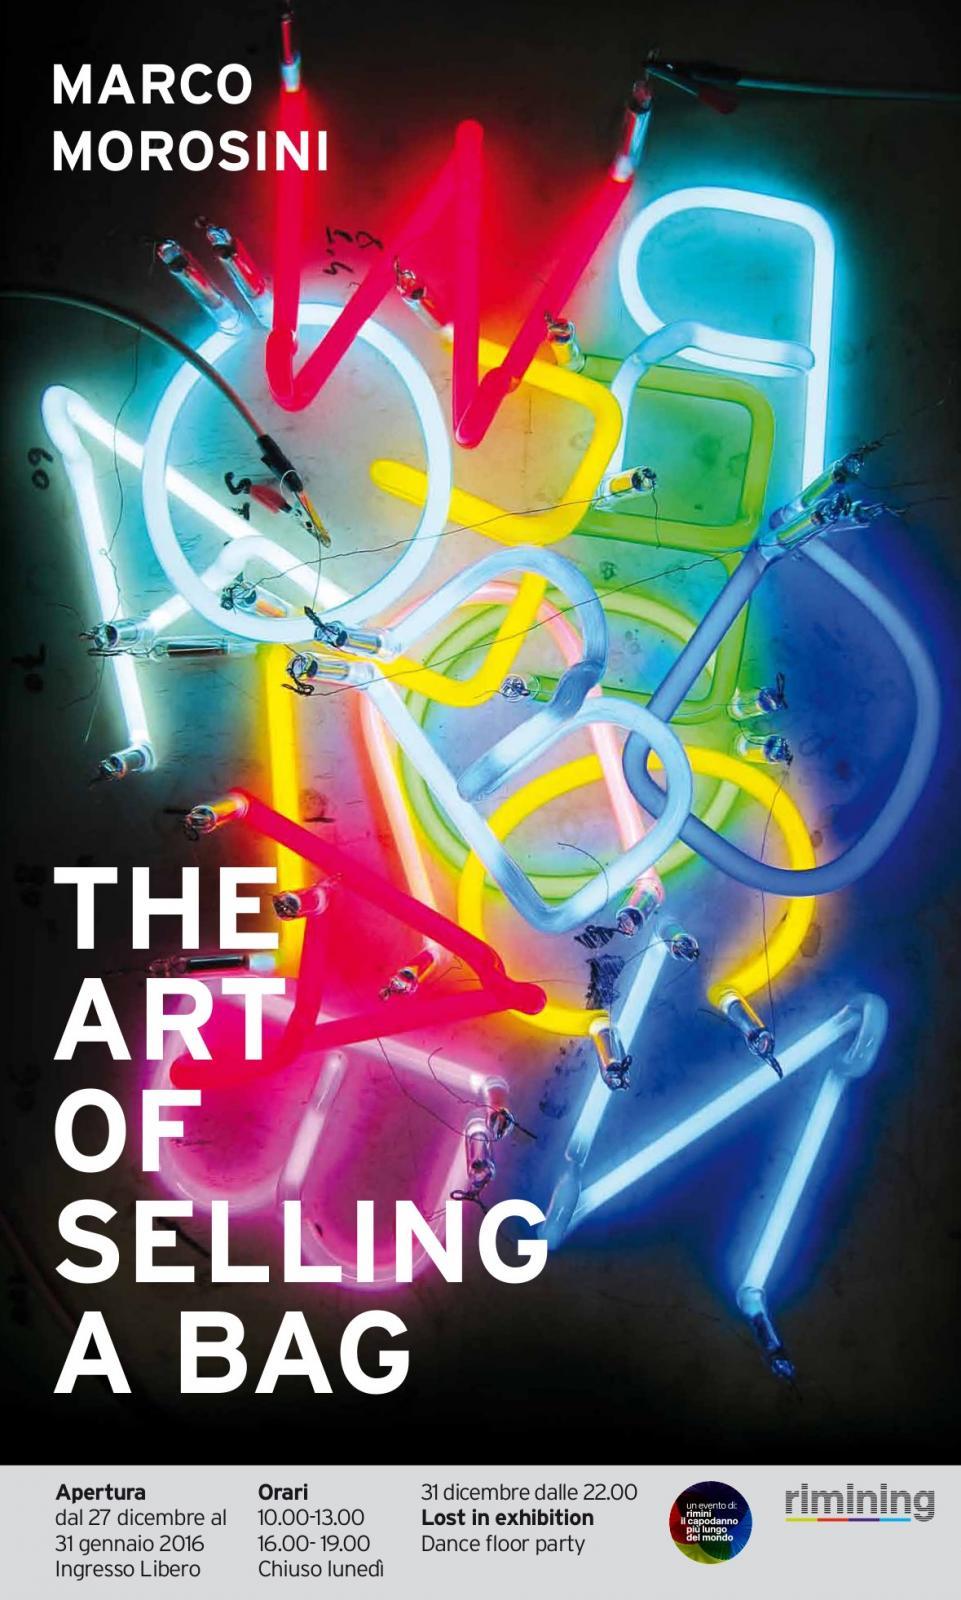 The art of selling a bag - Manifesto